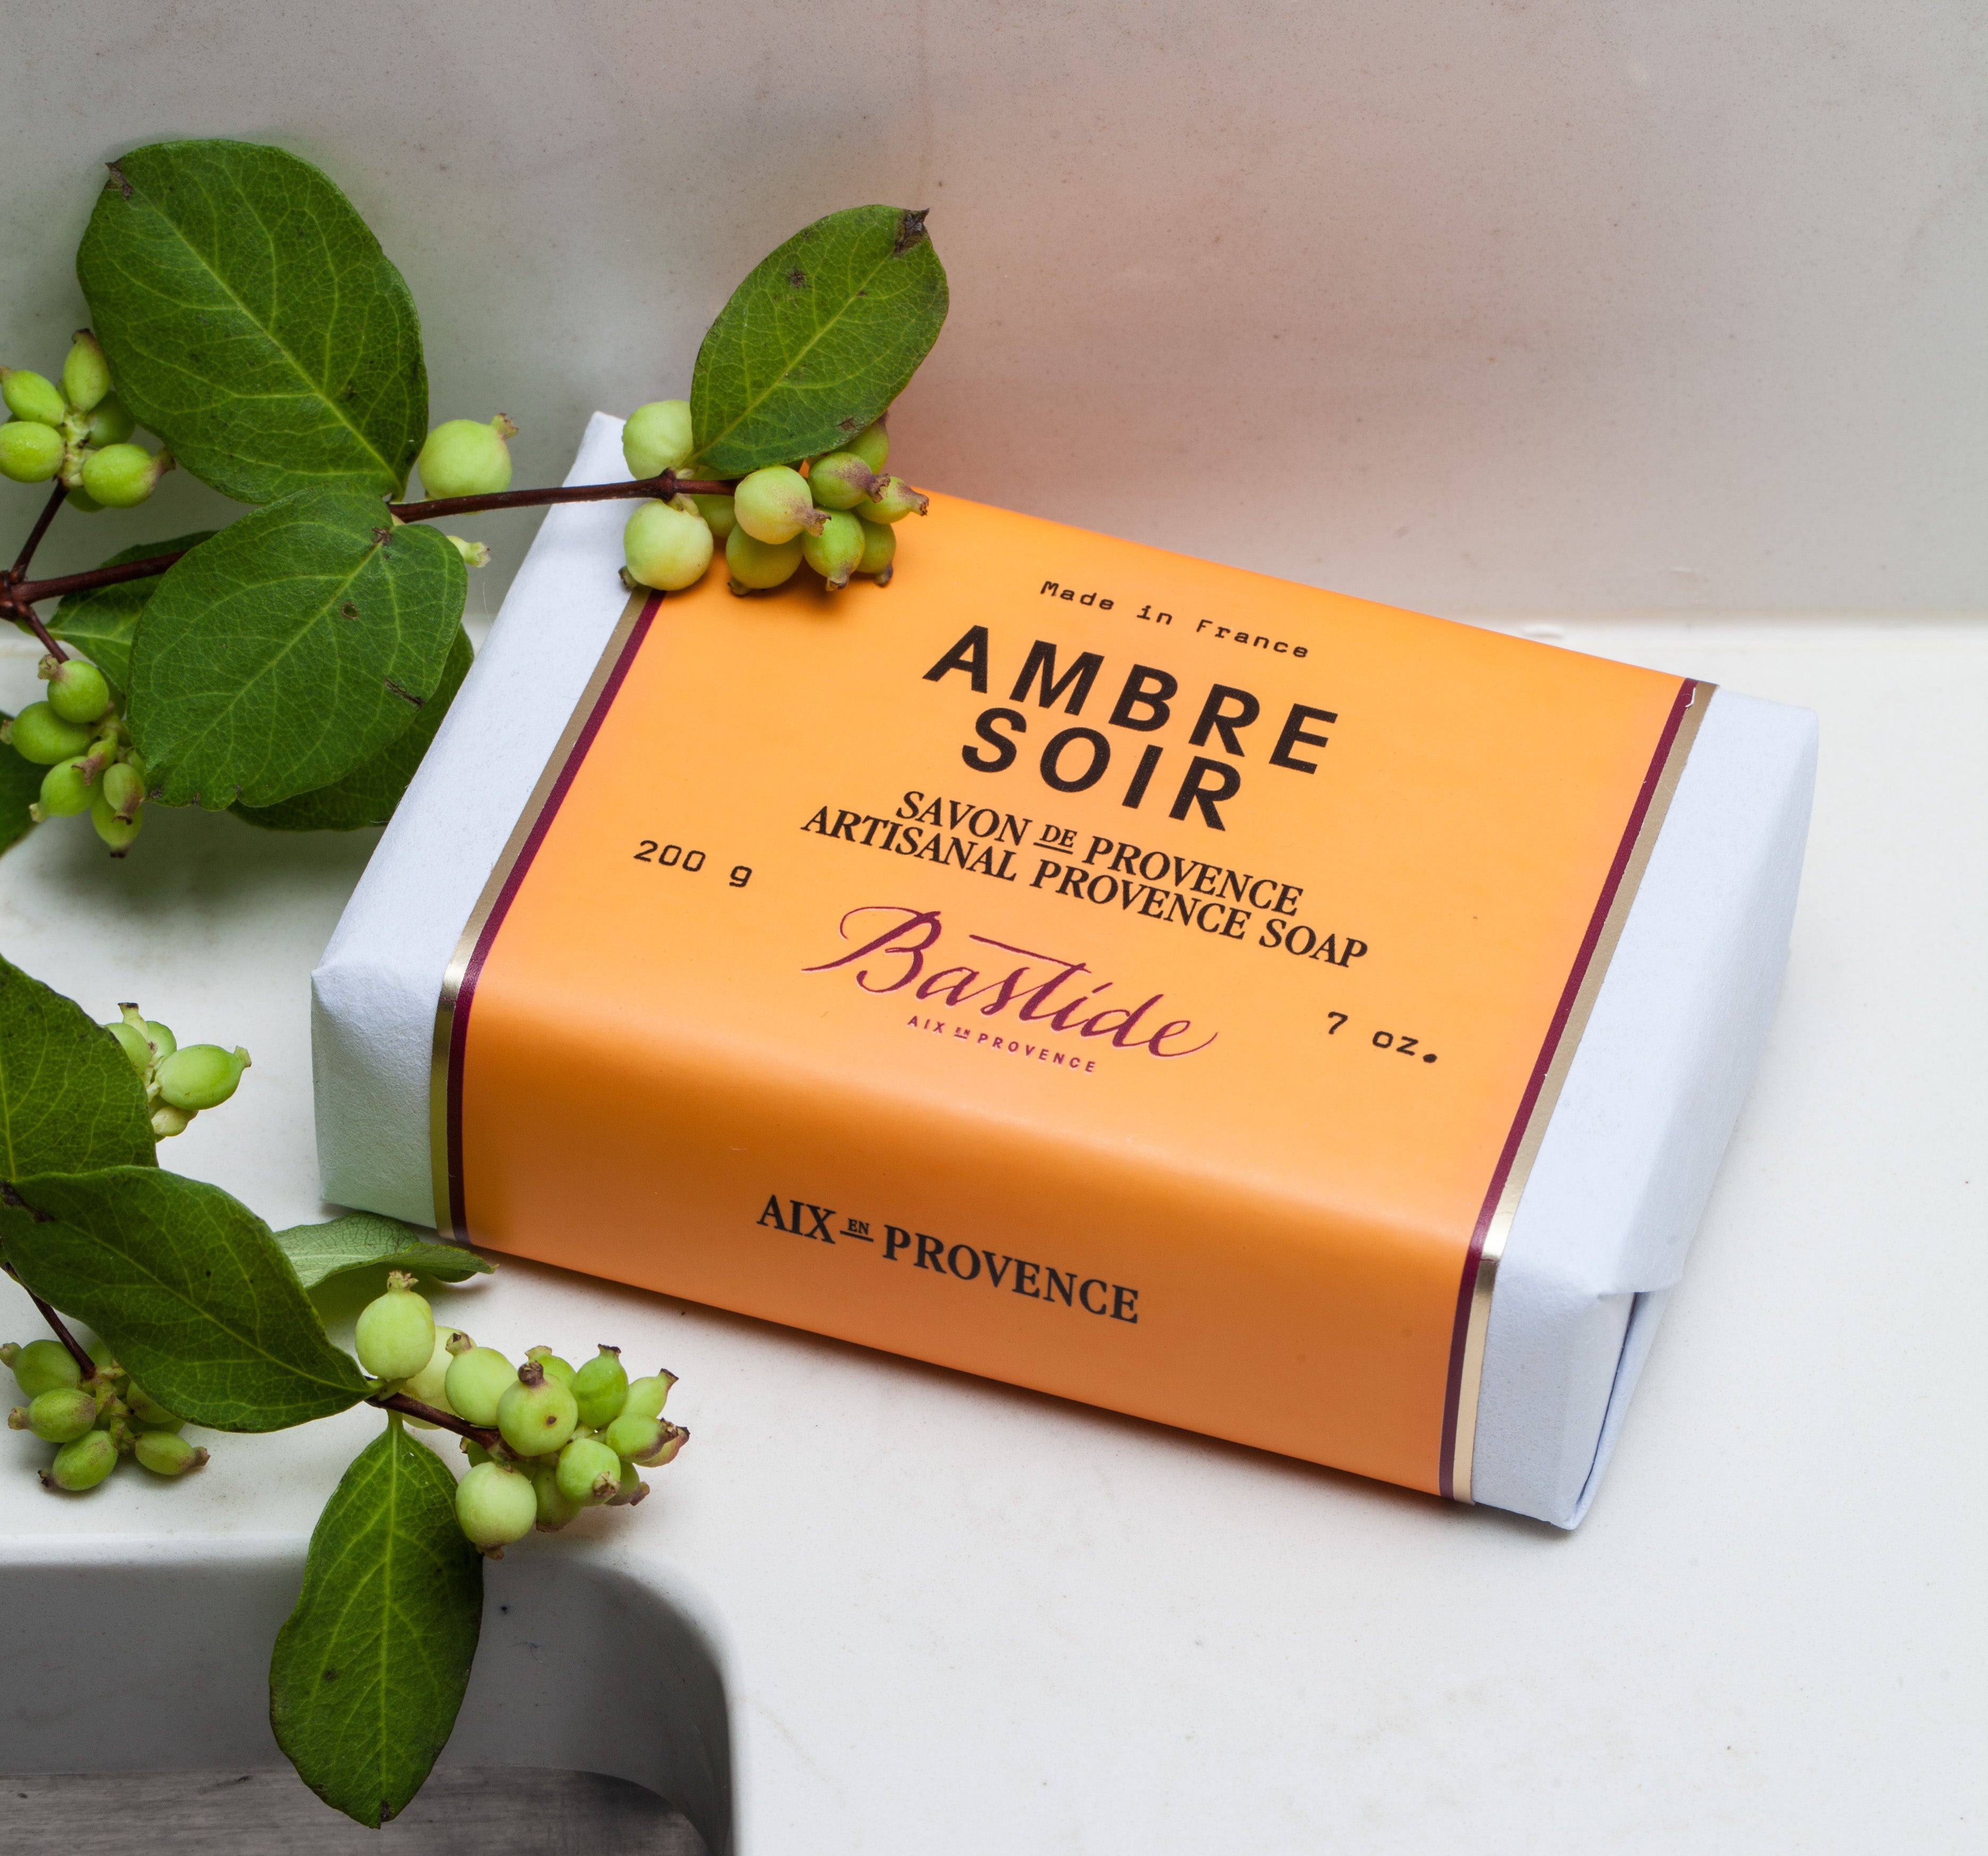 Bastide Provence Artisanal Soap Just Scored the Allure Stamp of Approval